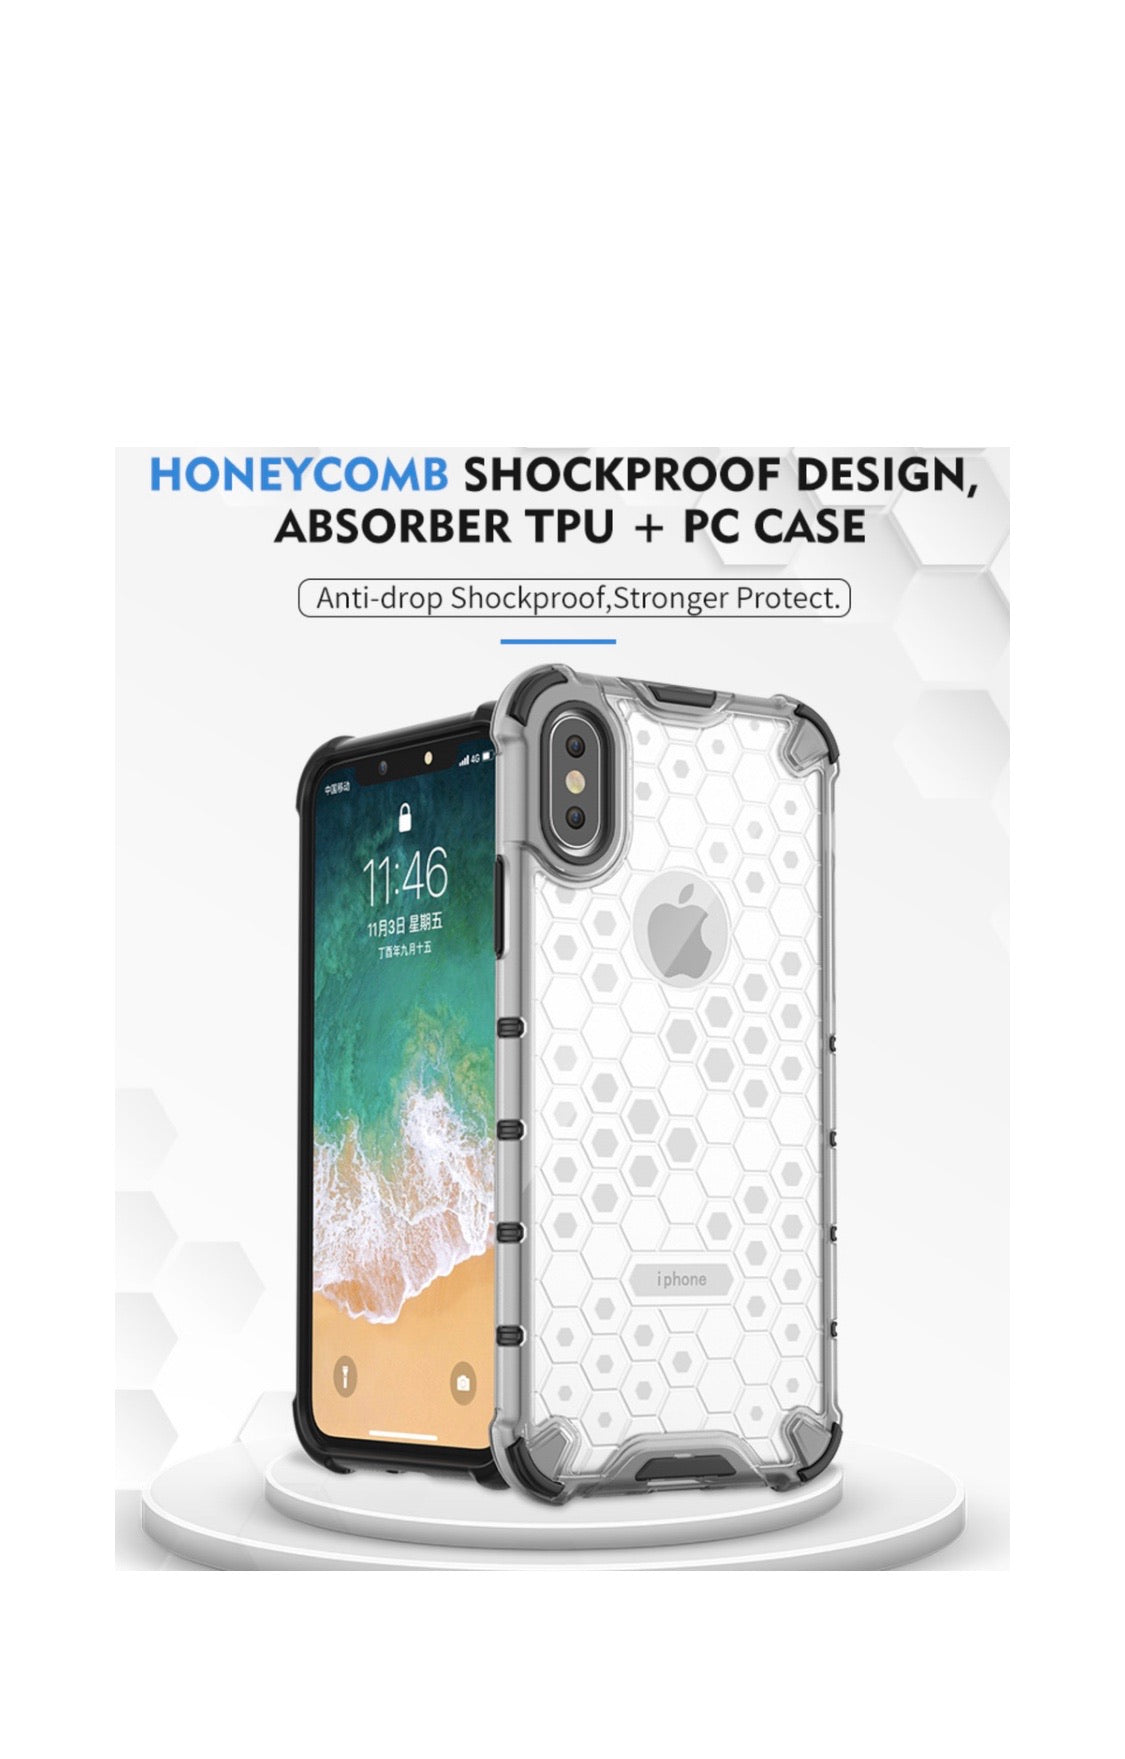 iPhone 11 Pro Max Shockproof Honeycomb Cover